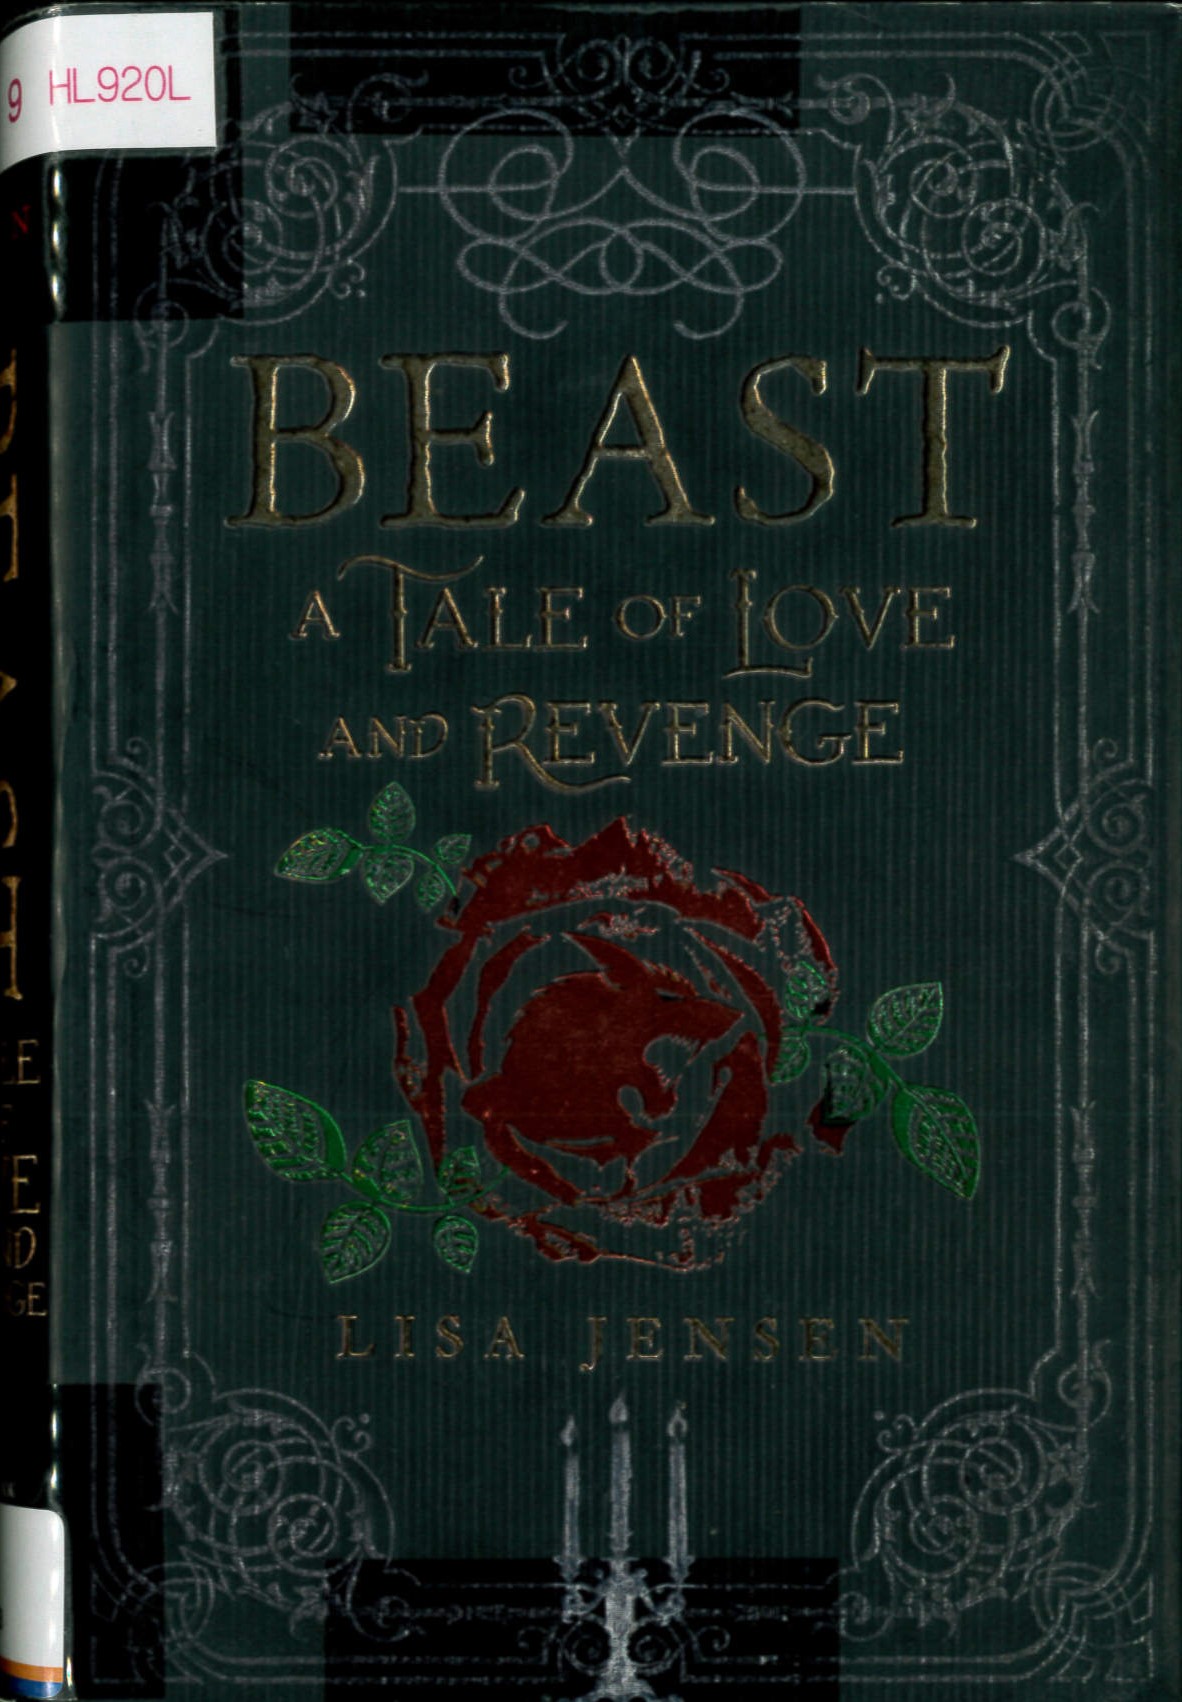 Beast : a tale of love and revenge /